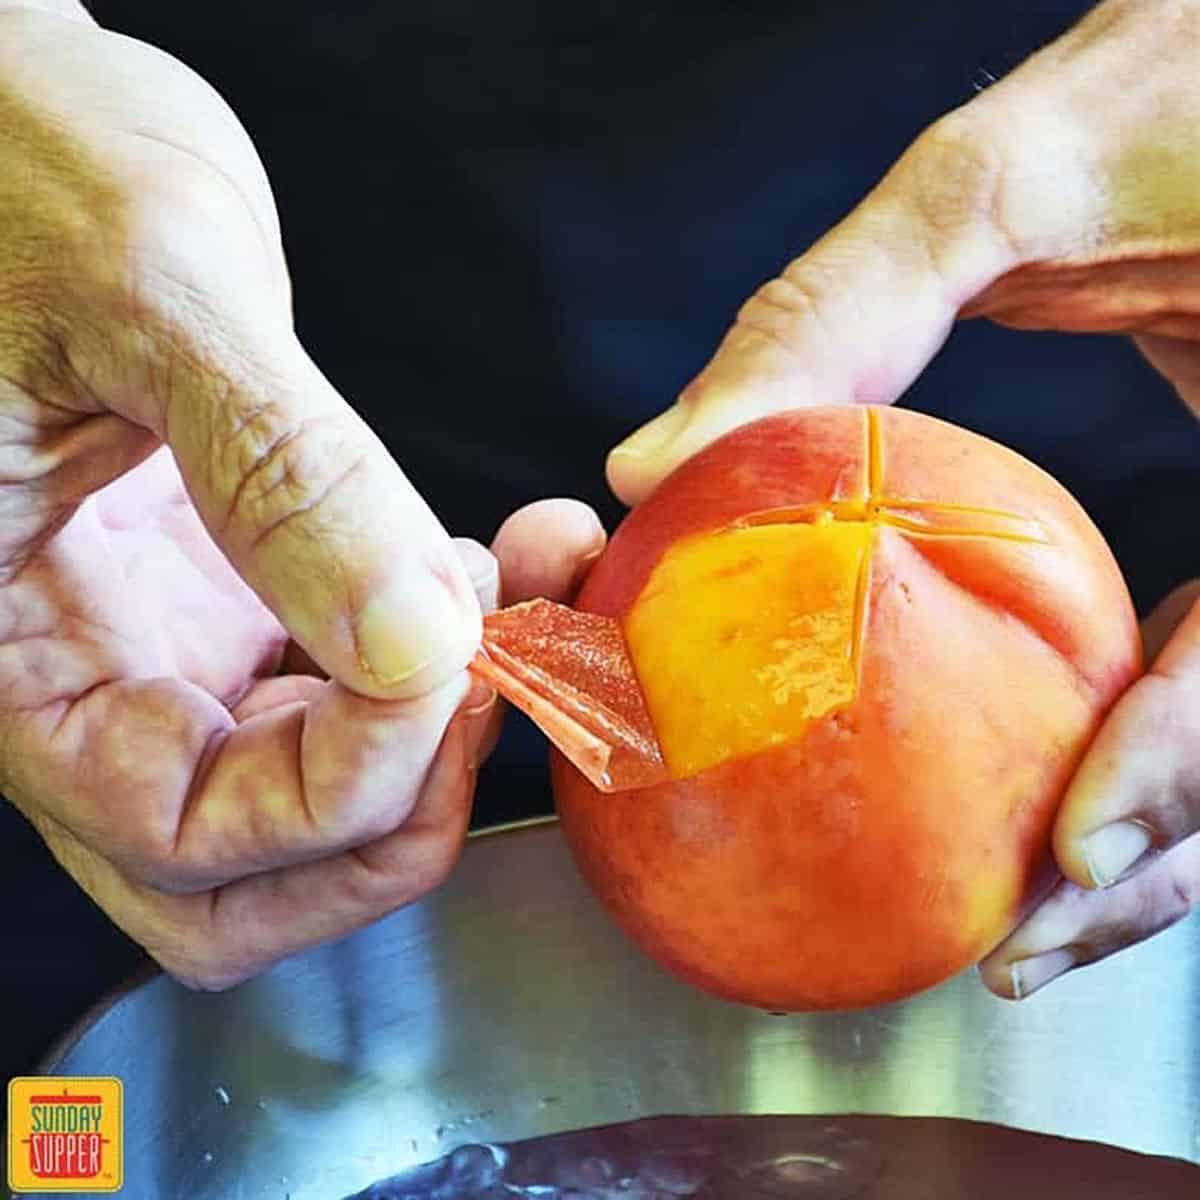 Using fingers to peel the skin off of a peach easily